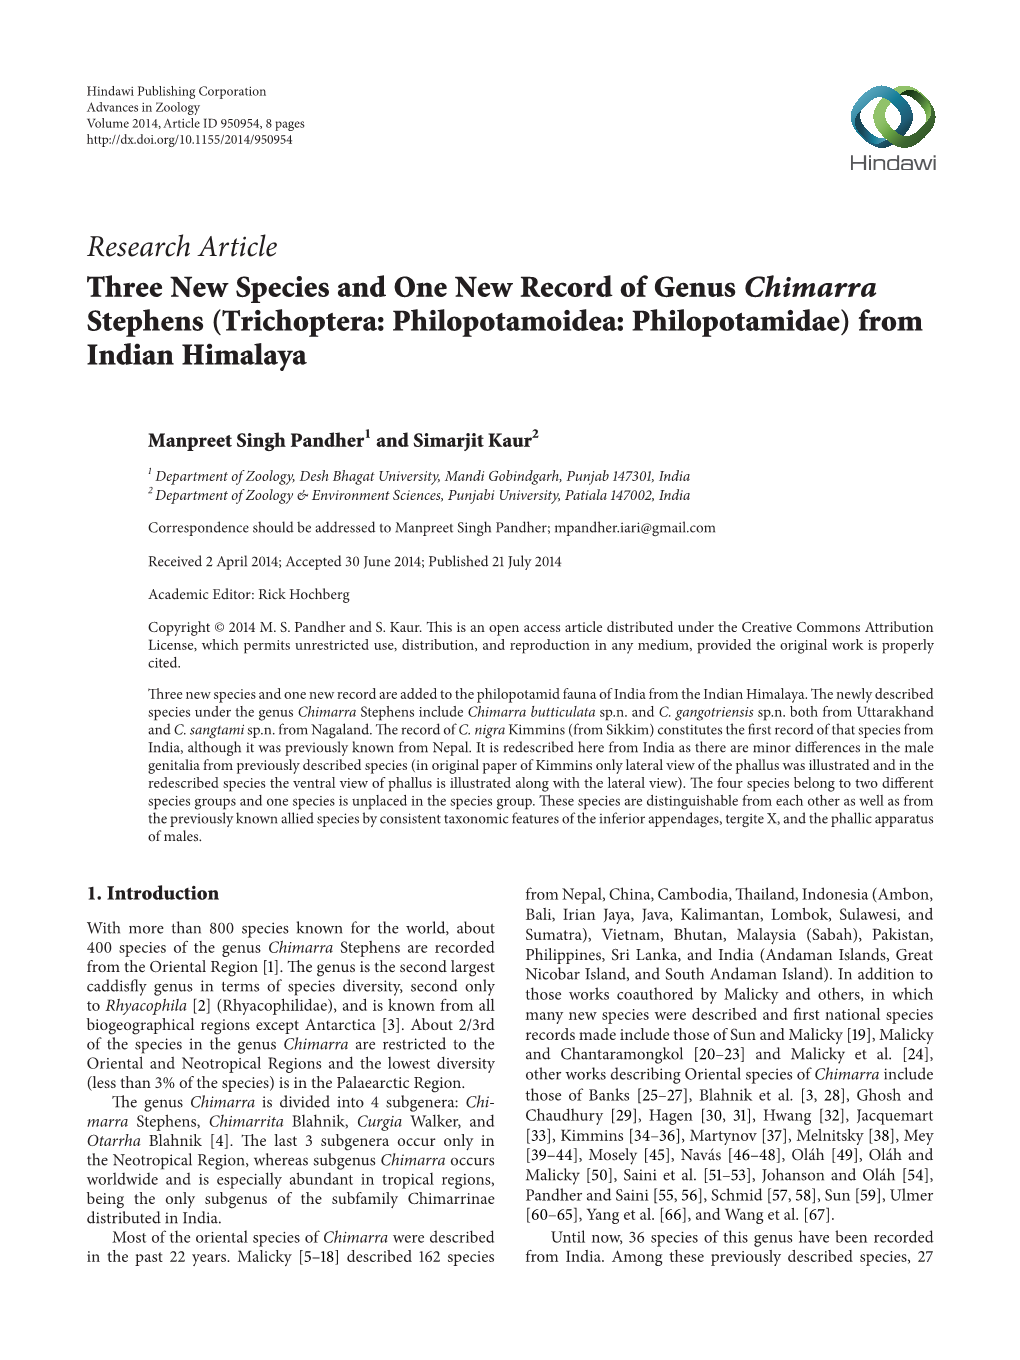 Three New Species and One New Record of Genus Chimarra Stephens (Trichoptera: Philopotamoidea: Philopotamidae) from Indian Himalaya